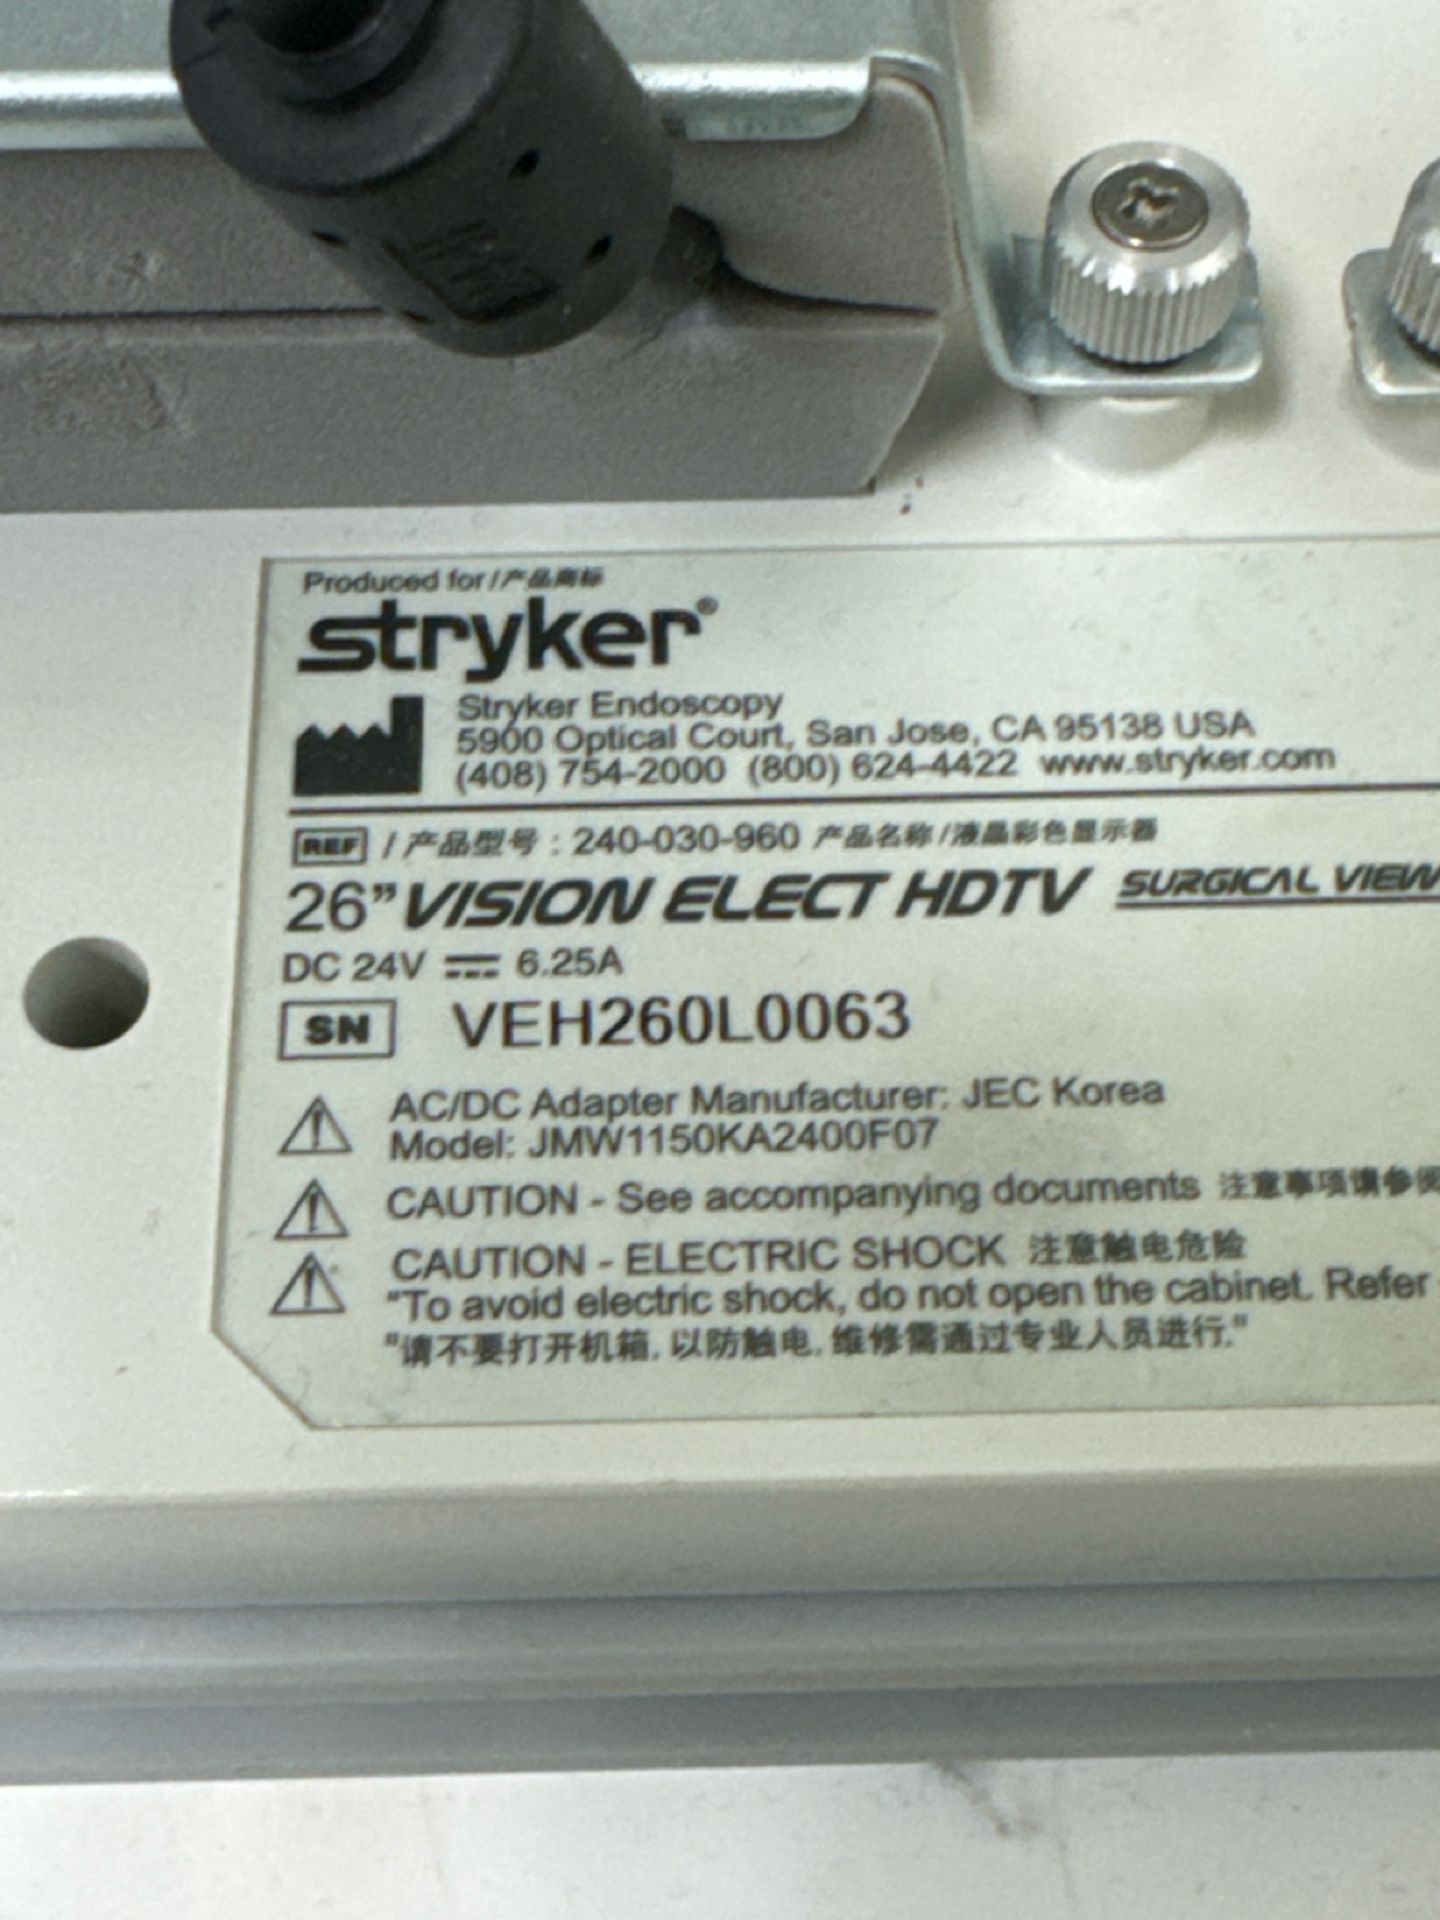 Stryker High Definition Capture w/ Surgical Viewing Monitor - Image 9 of 9